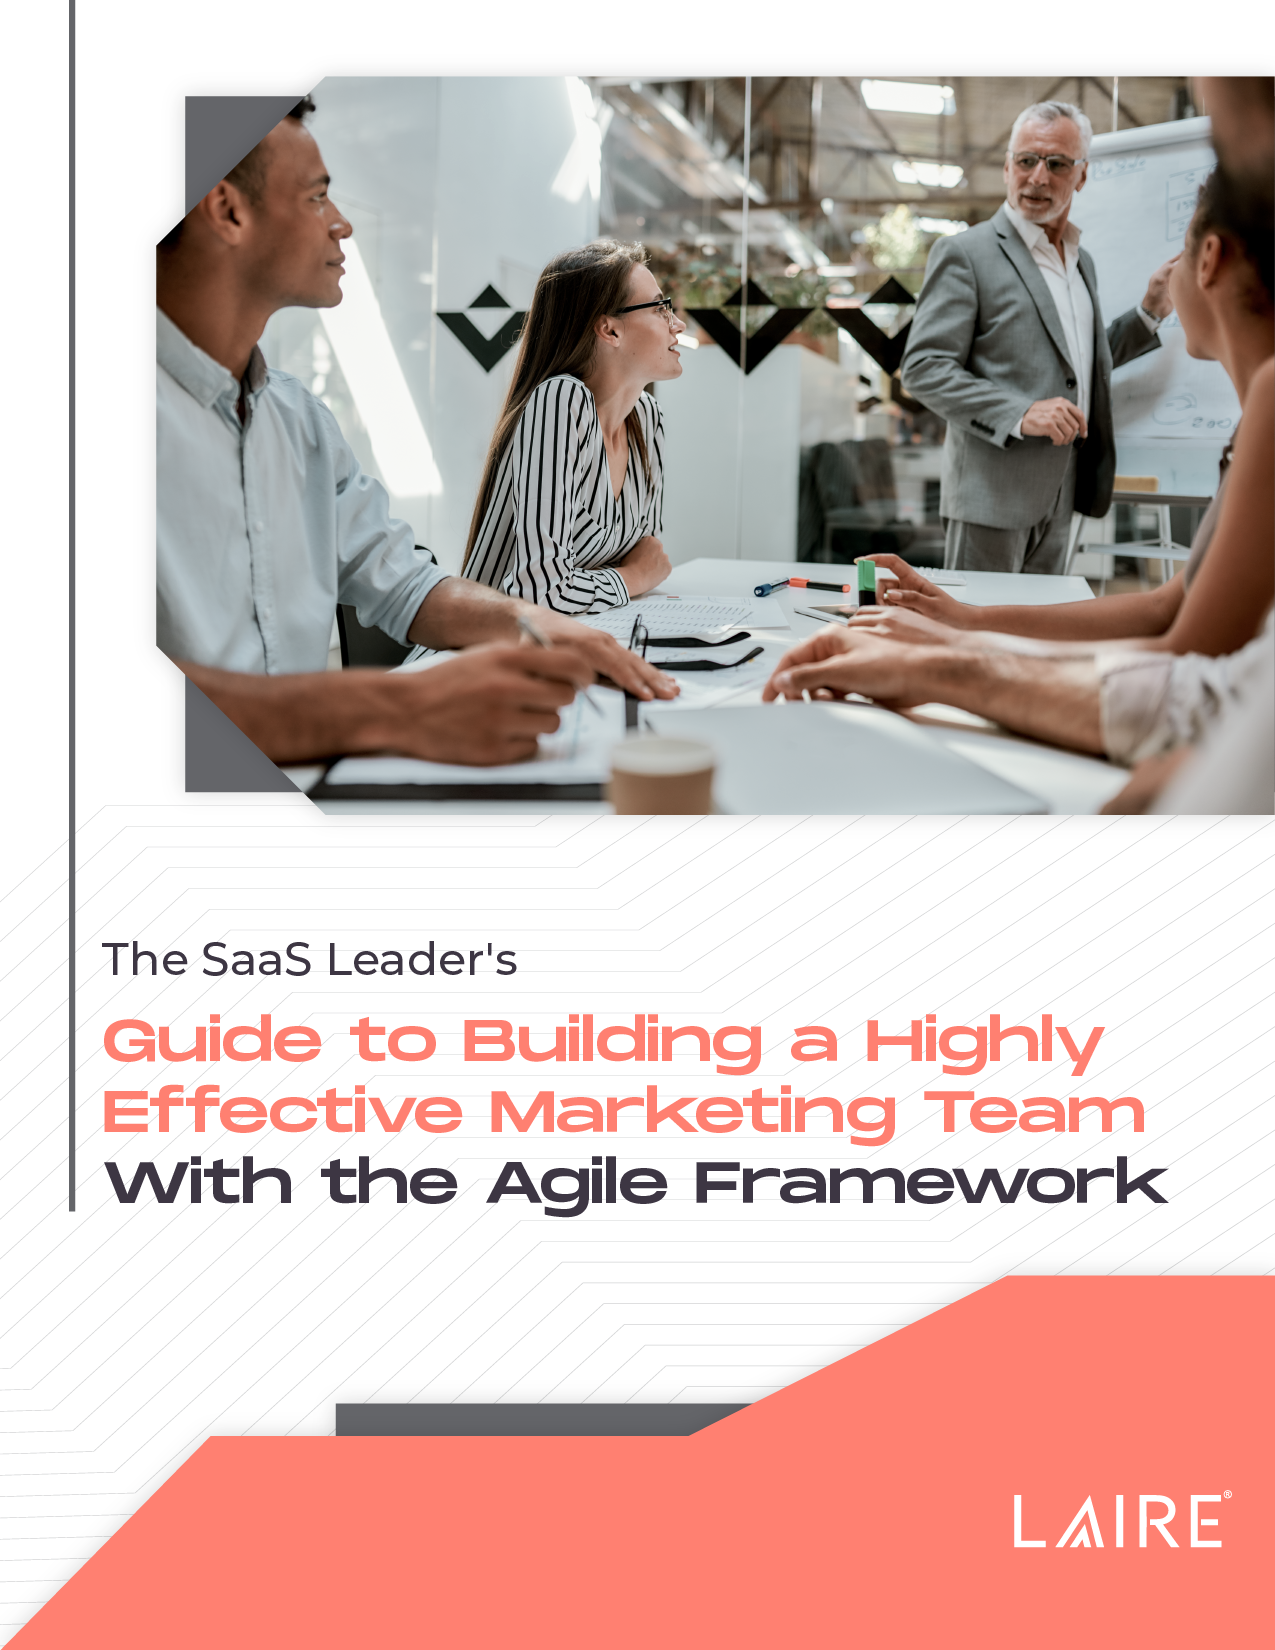 The SaaS Leaders Guide to Building a Highly Effective Marketing Team With the Agile Framework